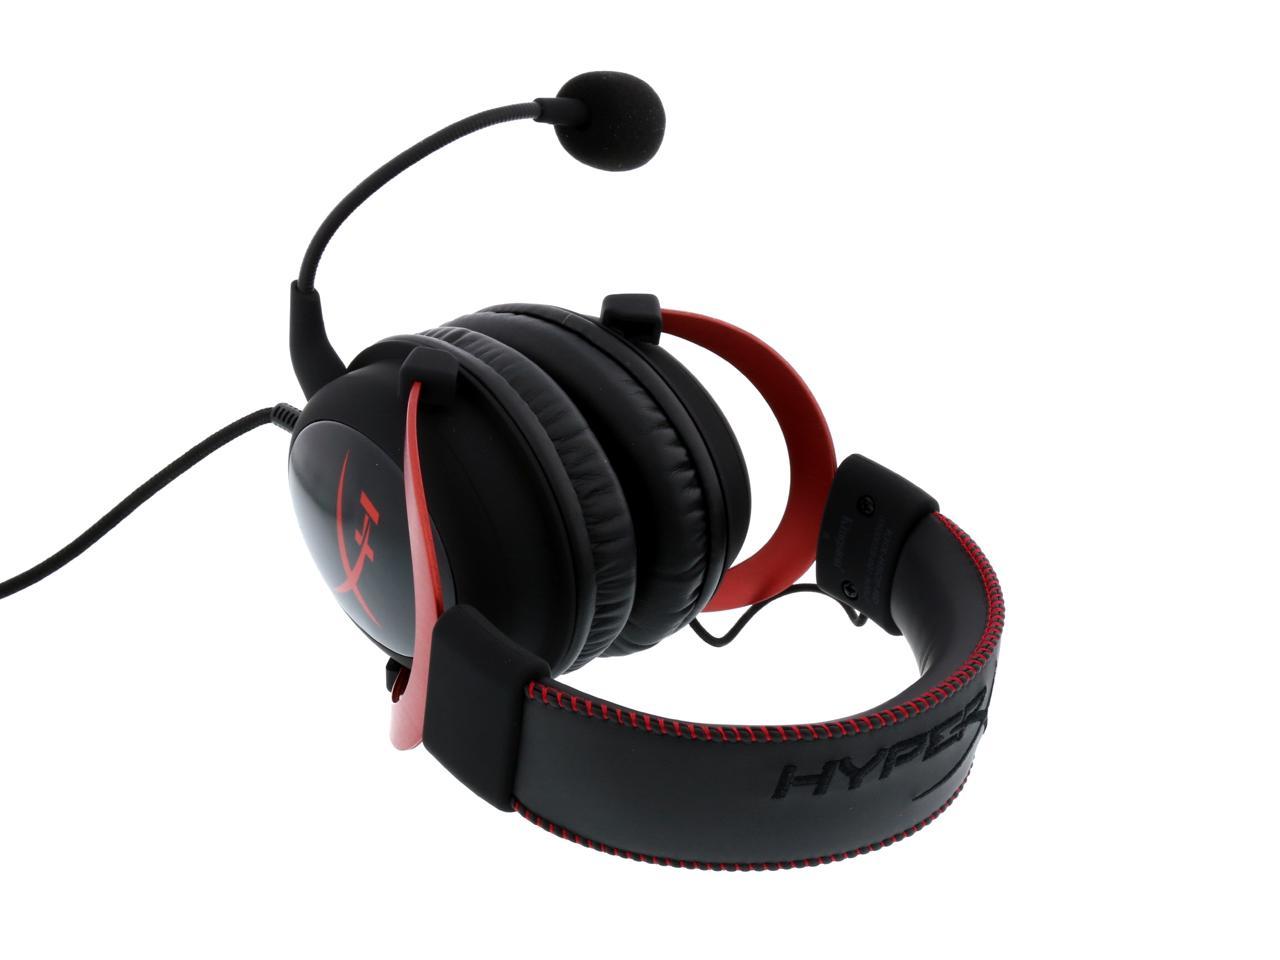 HyperX Cloud II Gaming Headset with 7.1 Virtual Surround Sound for PC / PS4  / Mac / Mobile - Red